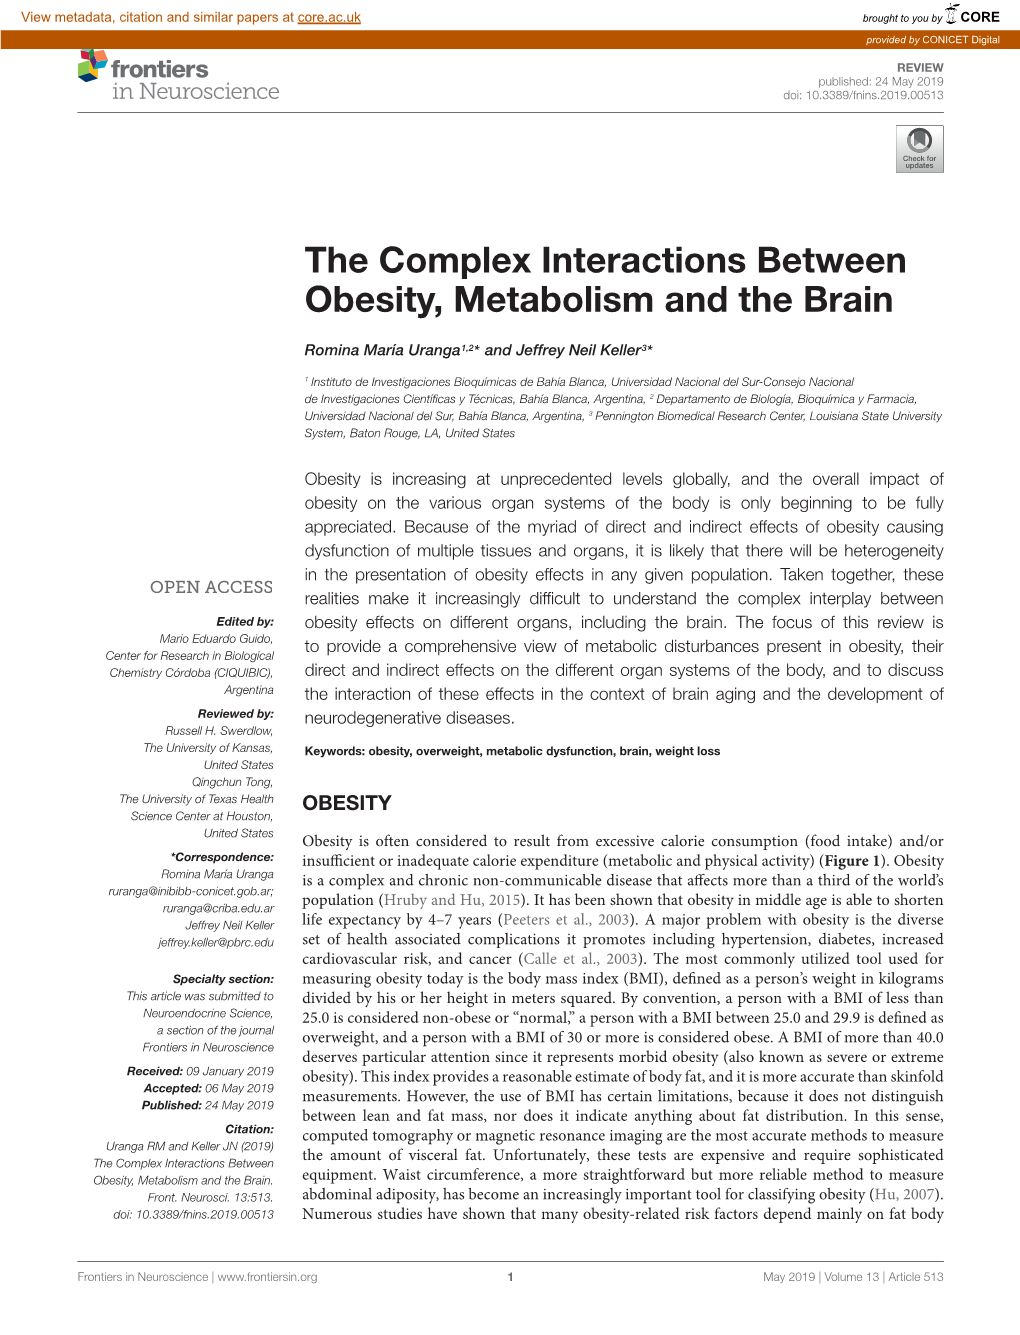 The Complex Interactions Between Obesity, Metabolism and the Brain